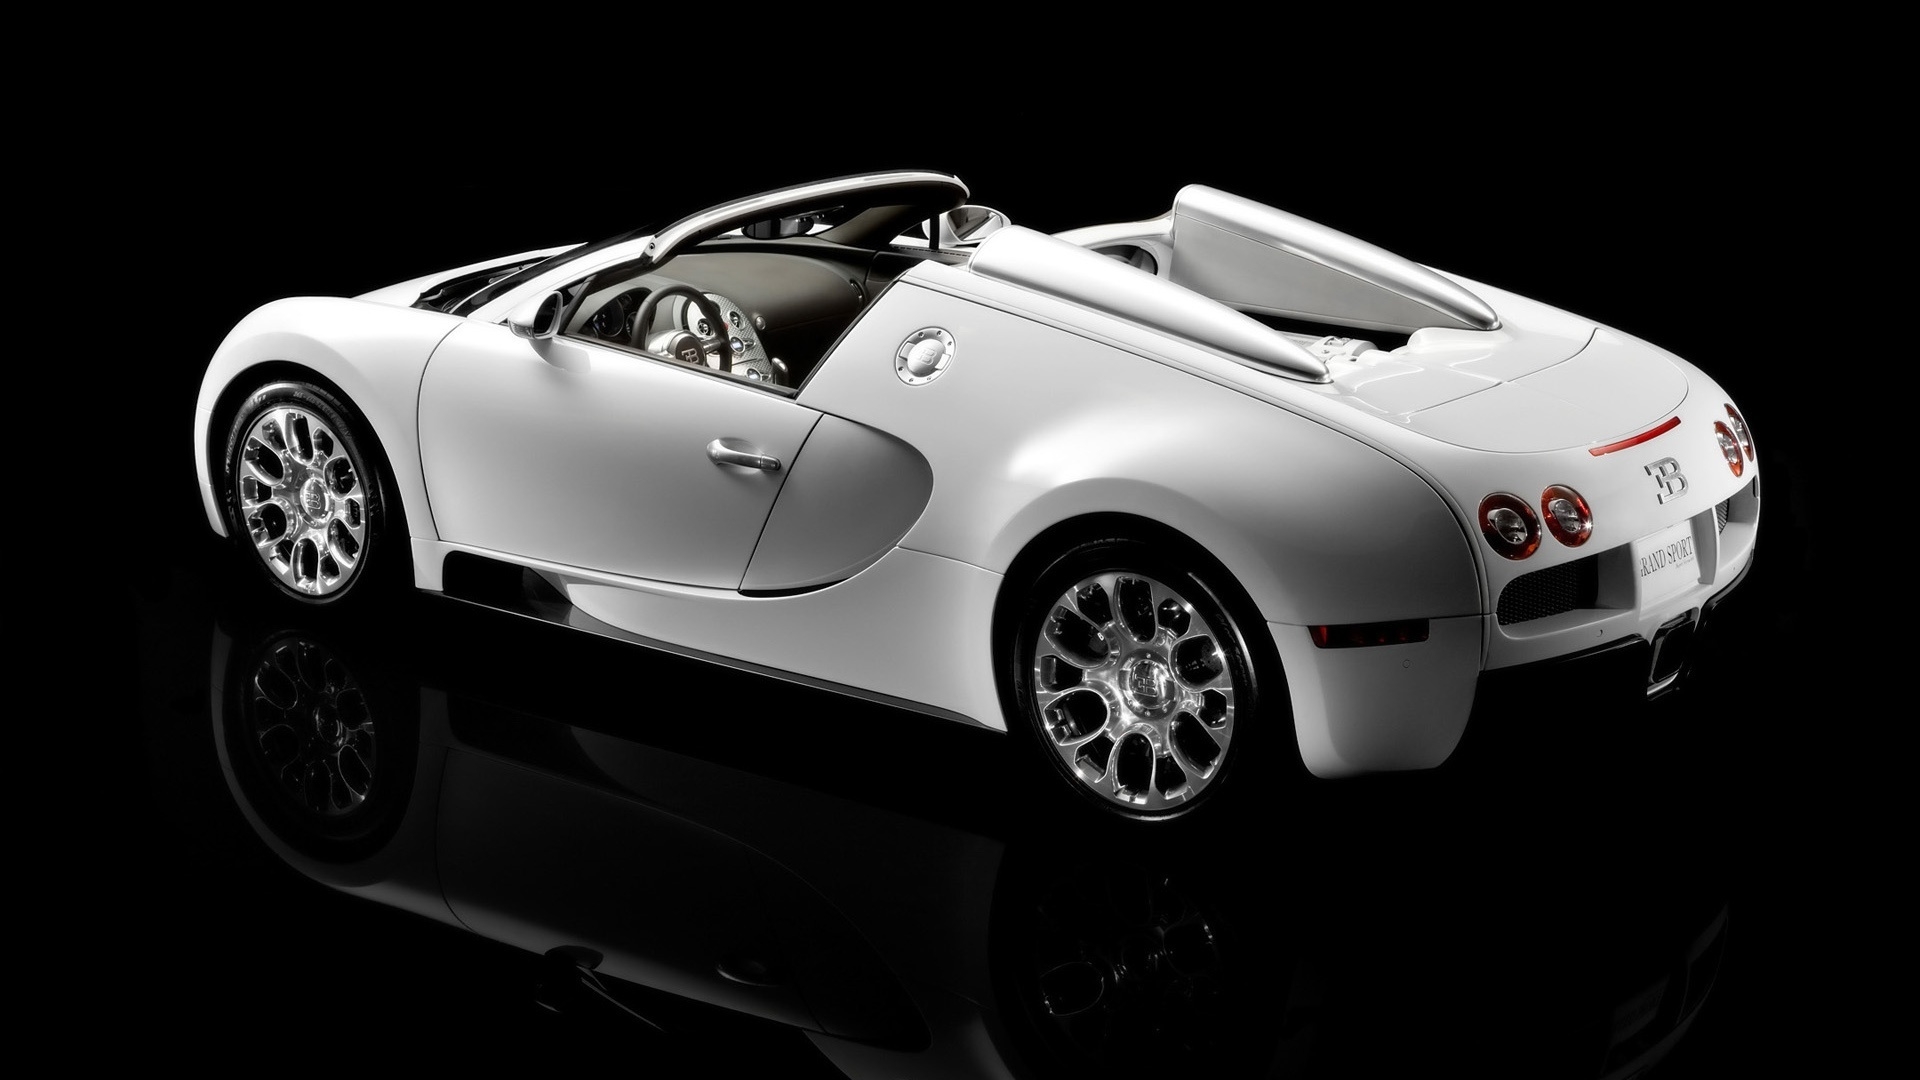 Bugatti Veyron 16.4 Grand Sport Production 2009 - Rear And Side Topless for 1920 x 1080 HDTV 1080p resolution